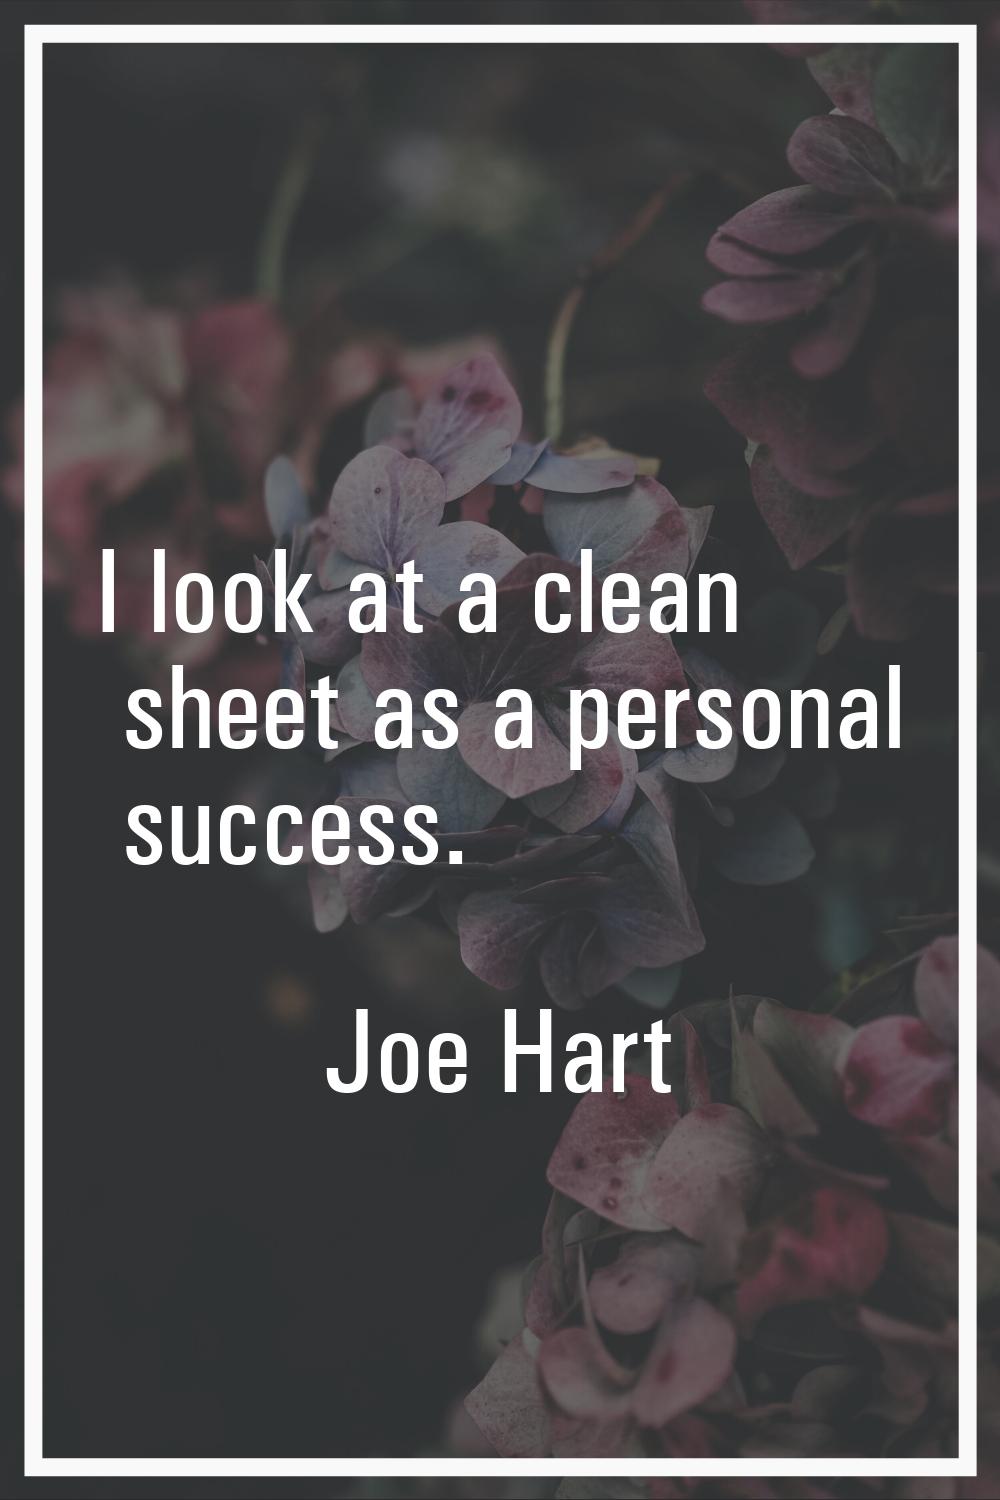 I look at a clean sheet as a personal success.